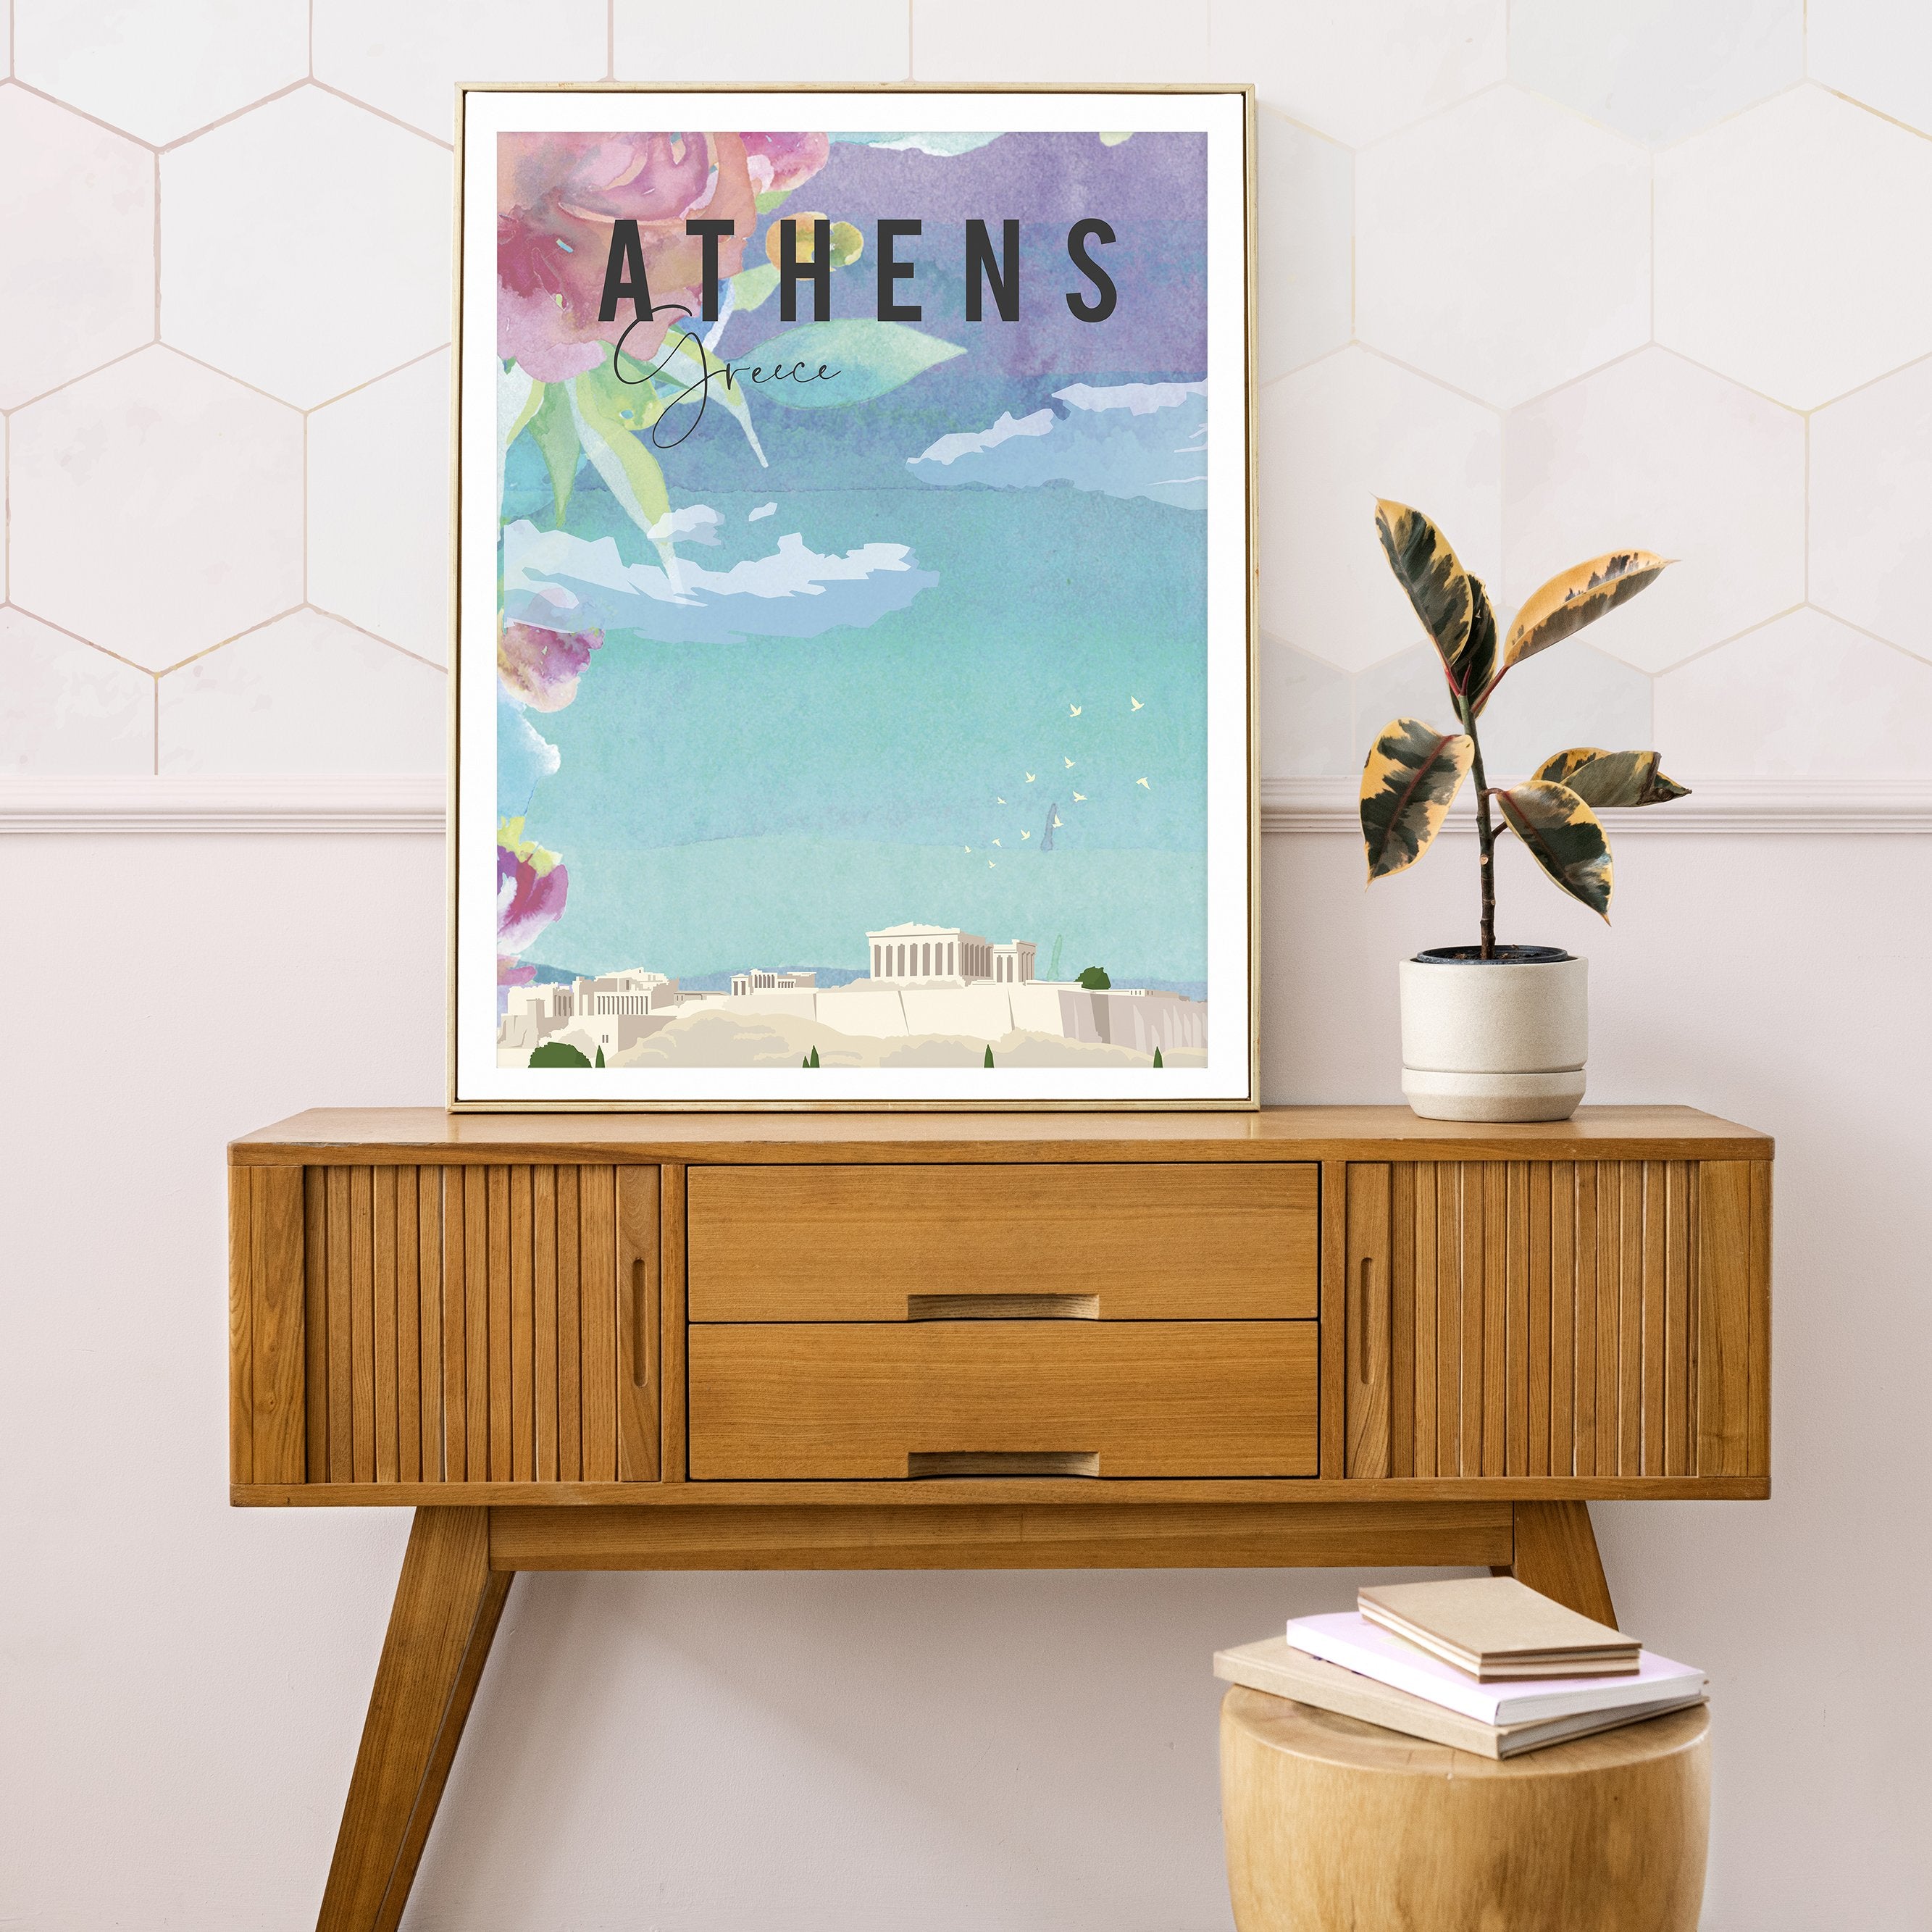 Athens Travel Poster - 0